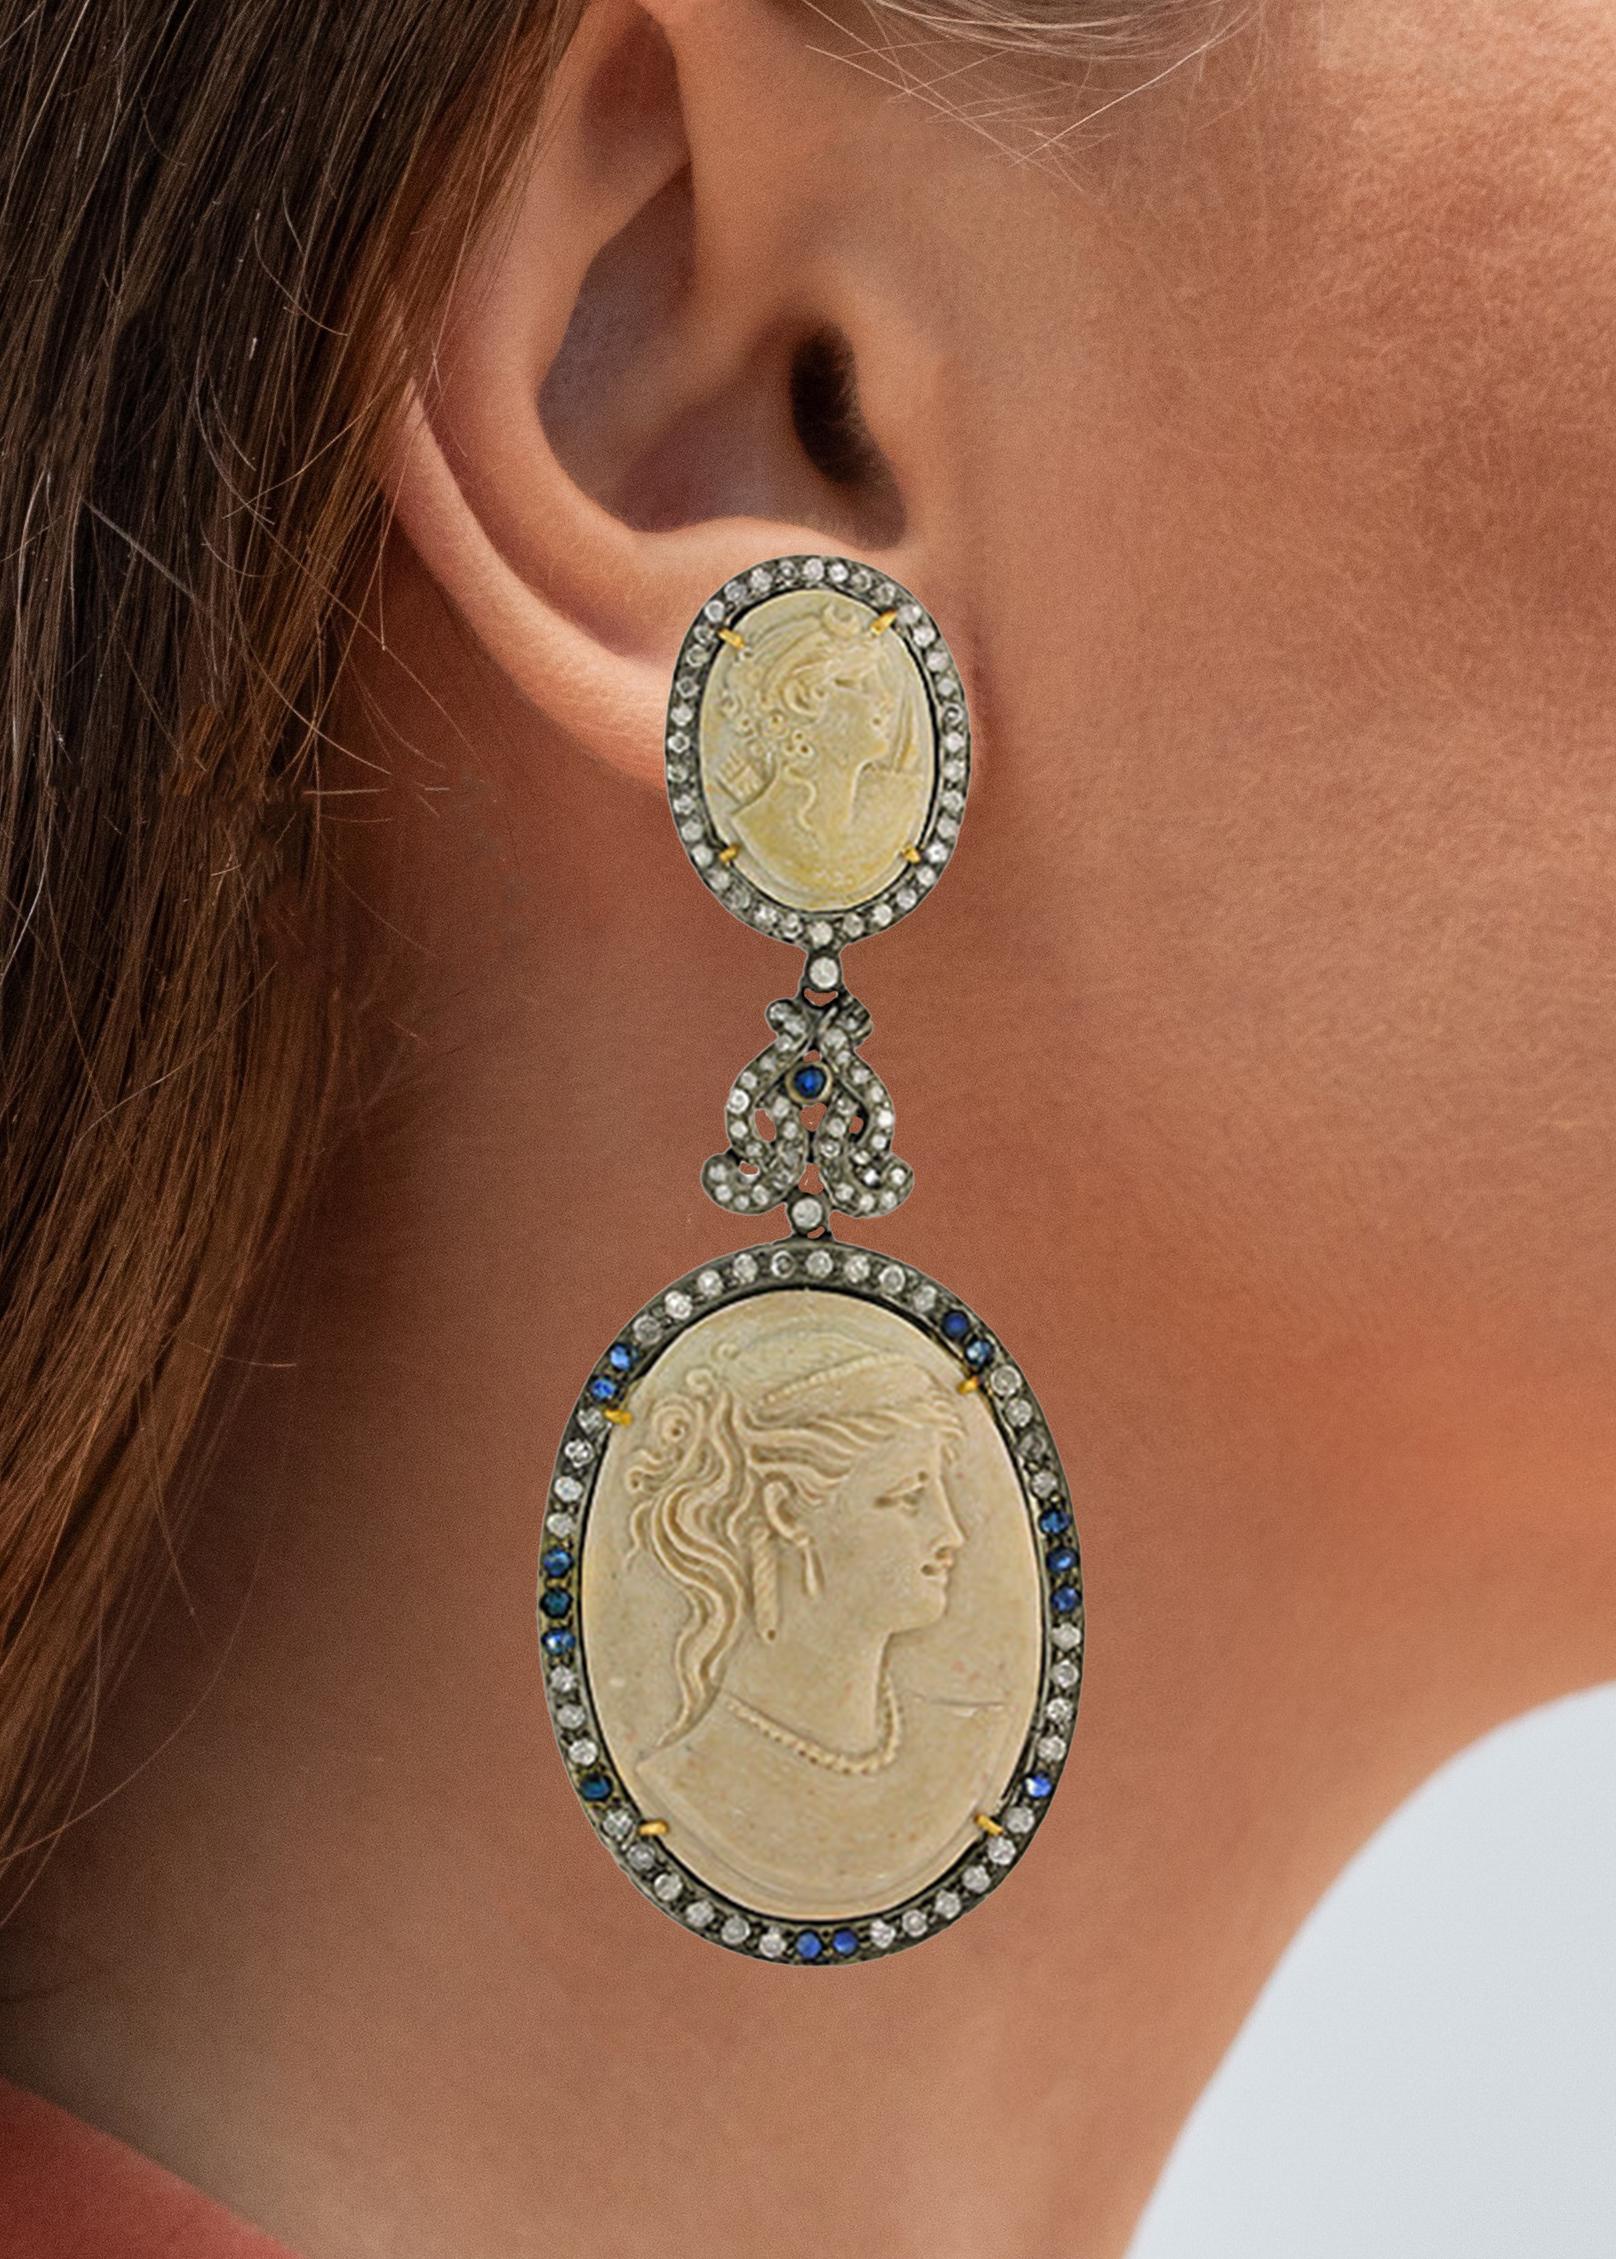 Art Deco Woman Portrait Shell Cameo Earrings With Sapphires & Diamonds  99.27 Carats For Sale